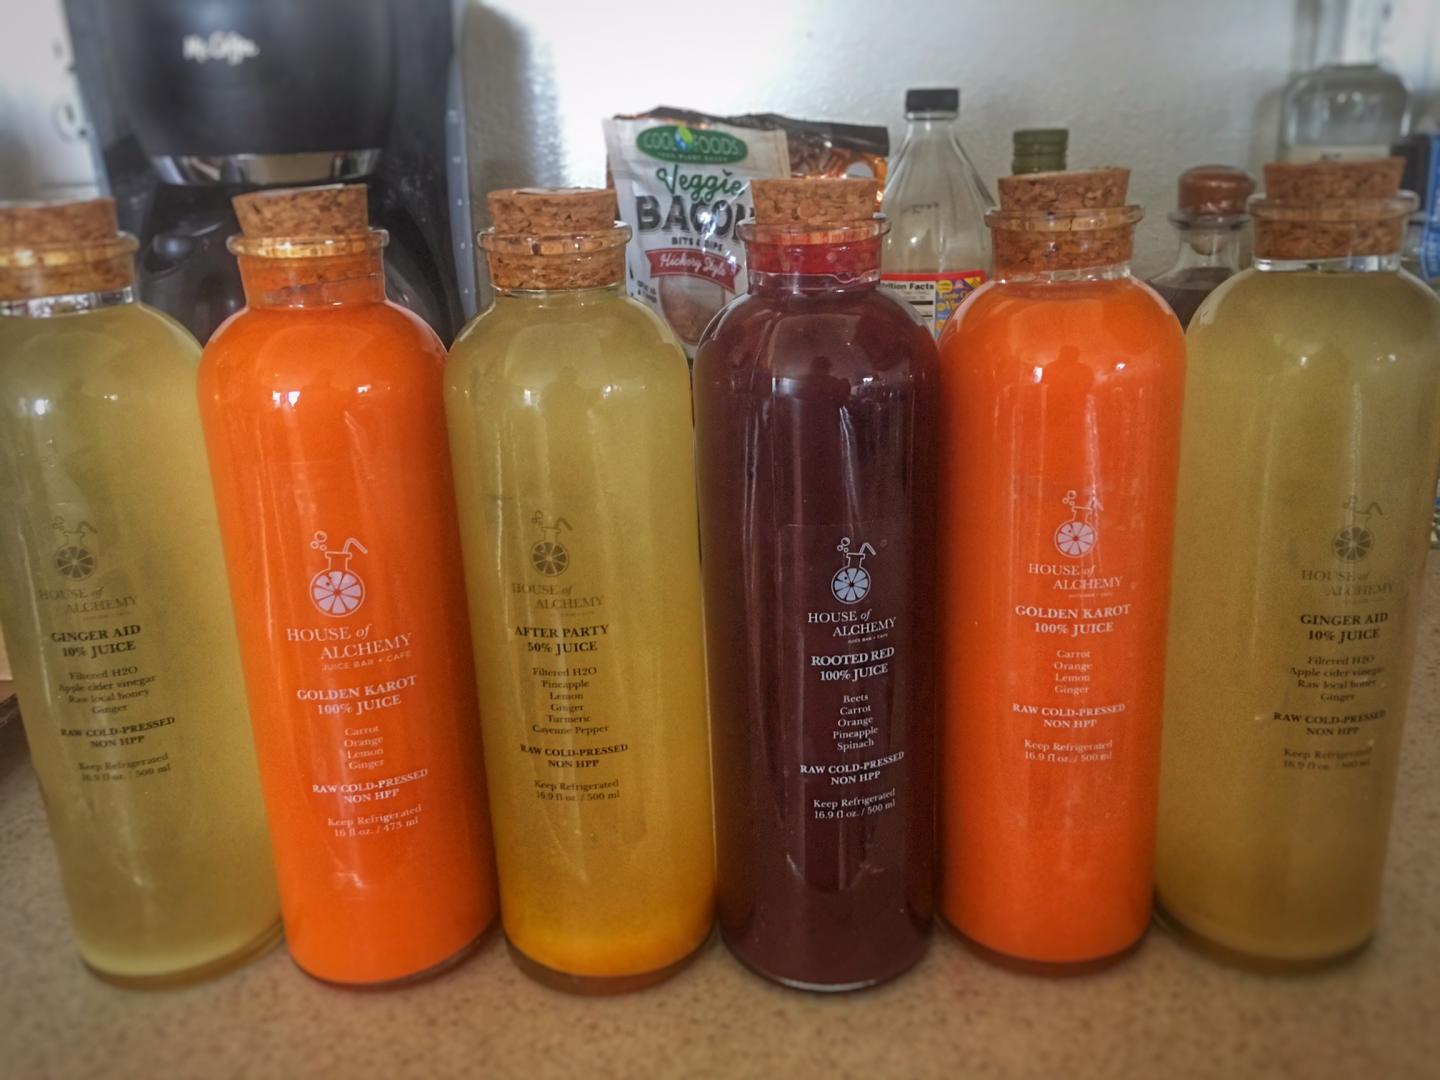 A look at a two week juice cleanse and what happens when you go on a juice cleanse. Juice cleanse by House of Alchemy Las Vegas. 